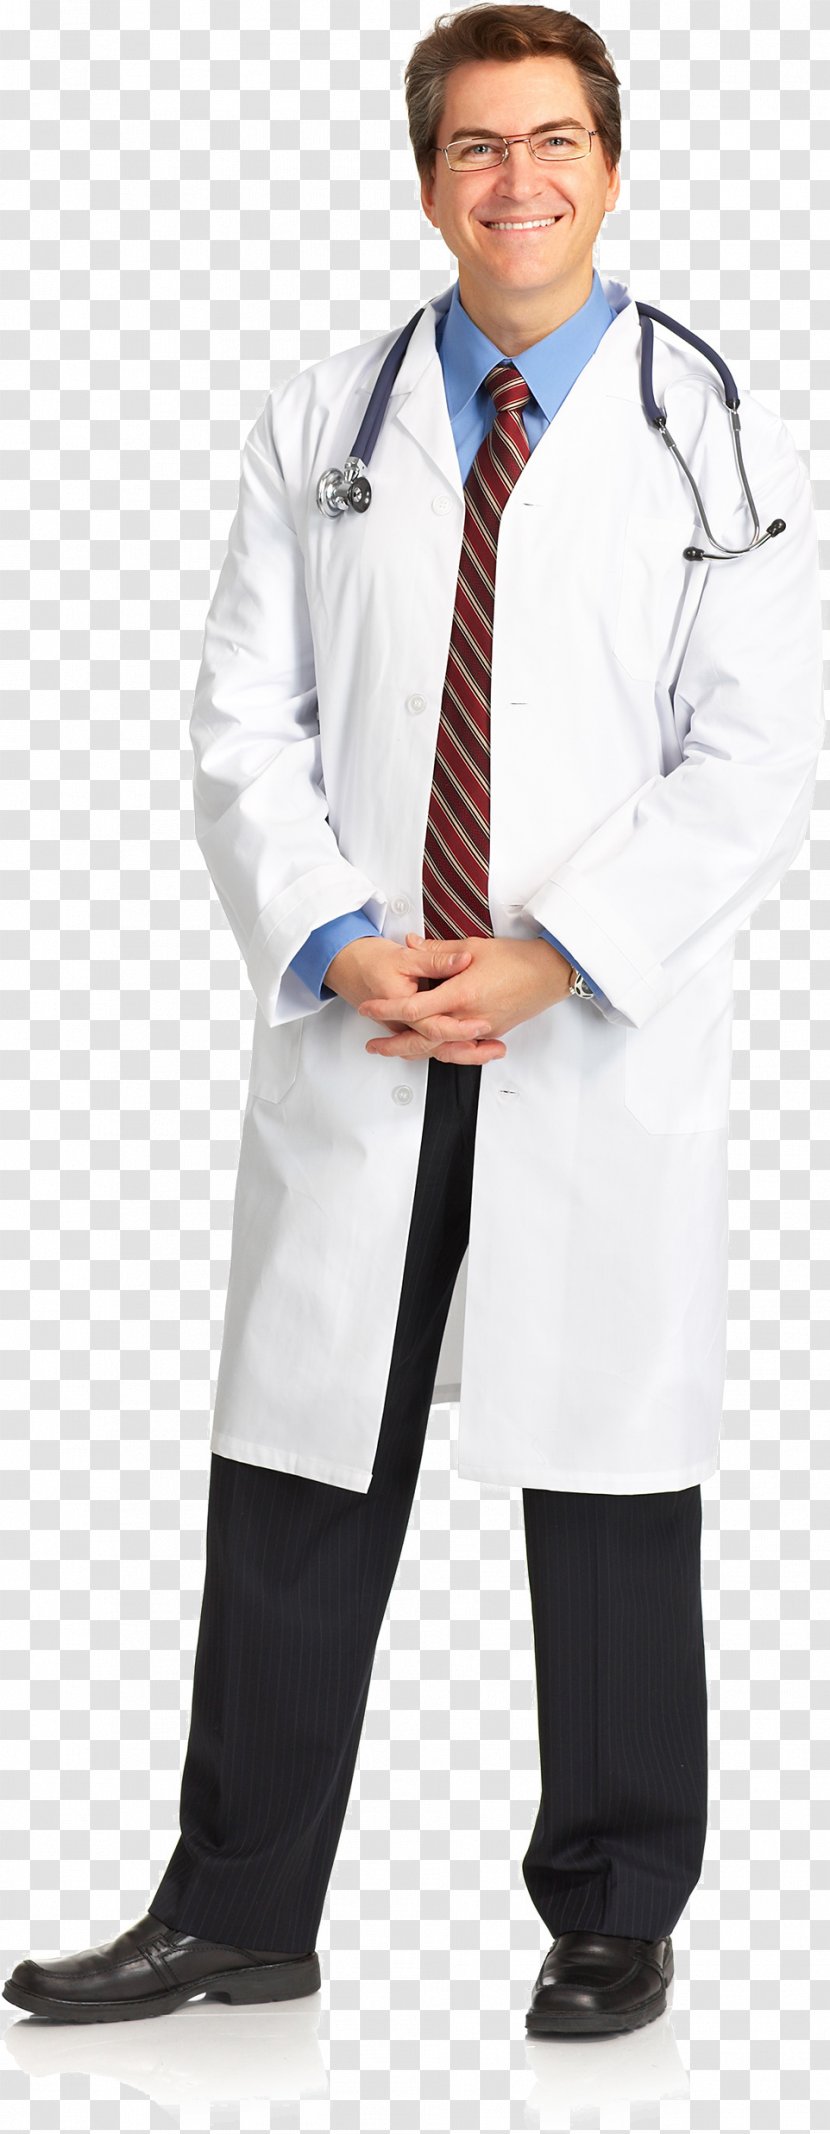 Physician Medicine Health Care Clinic Stethoscope - Doctor Transparent PNG